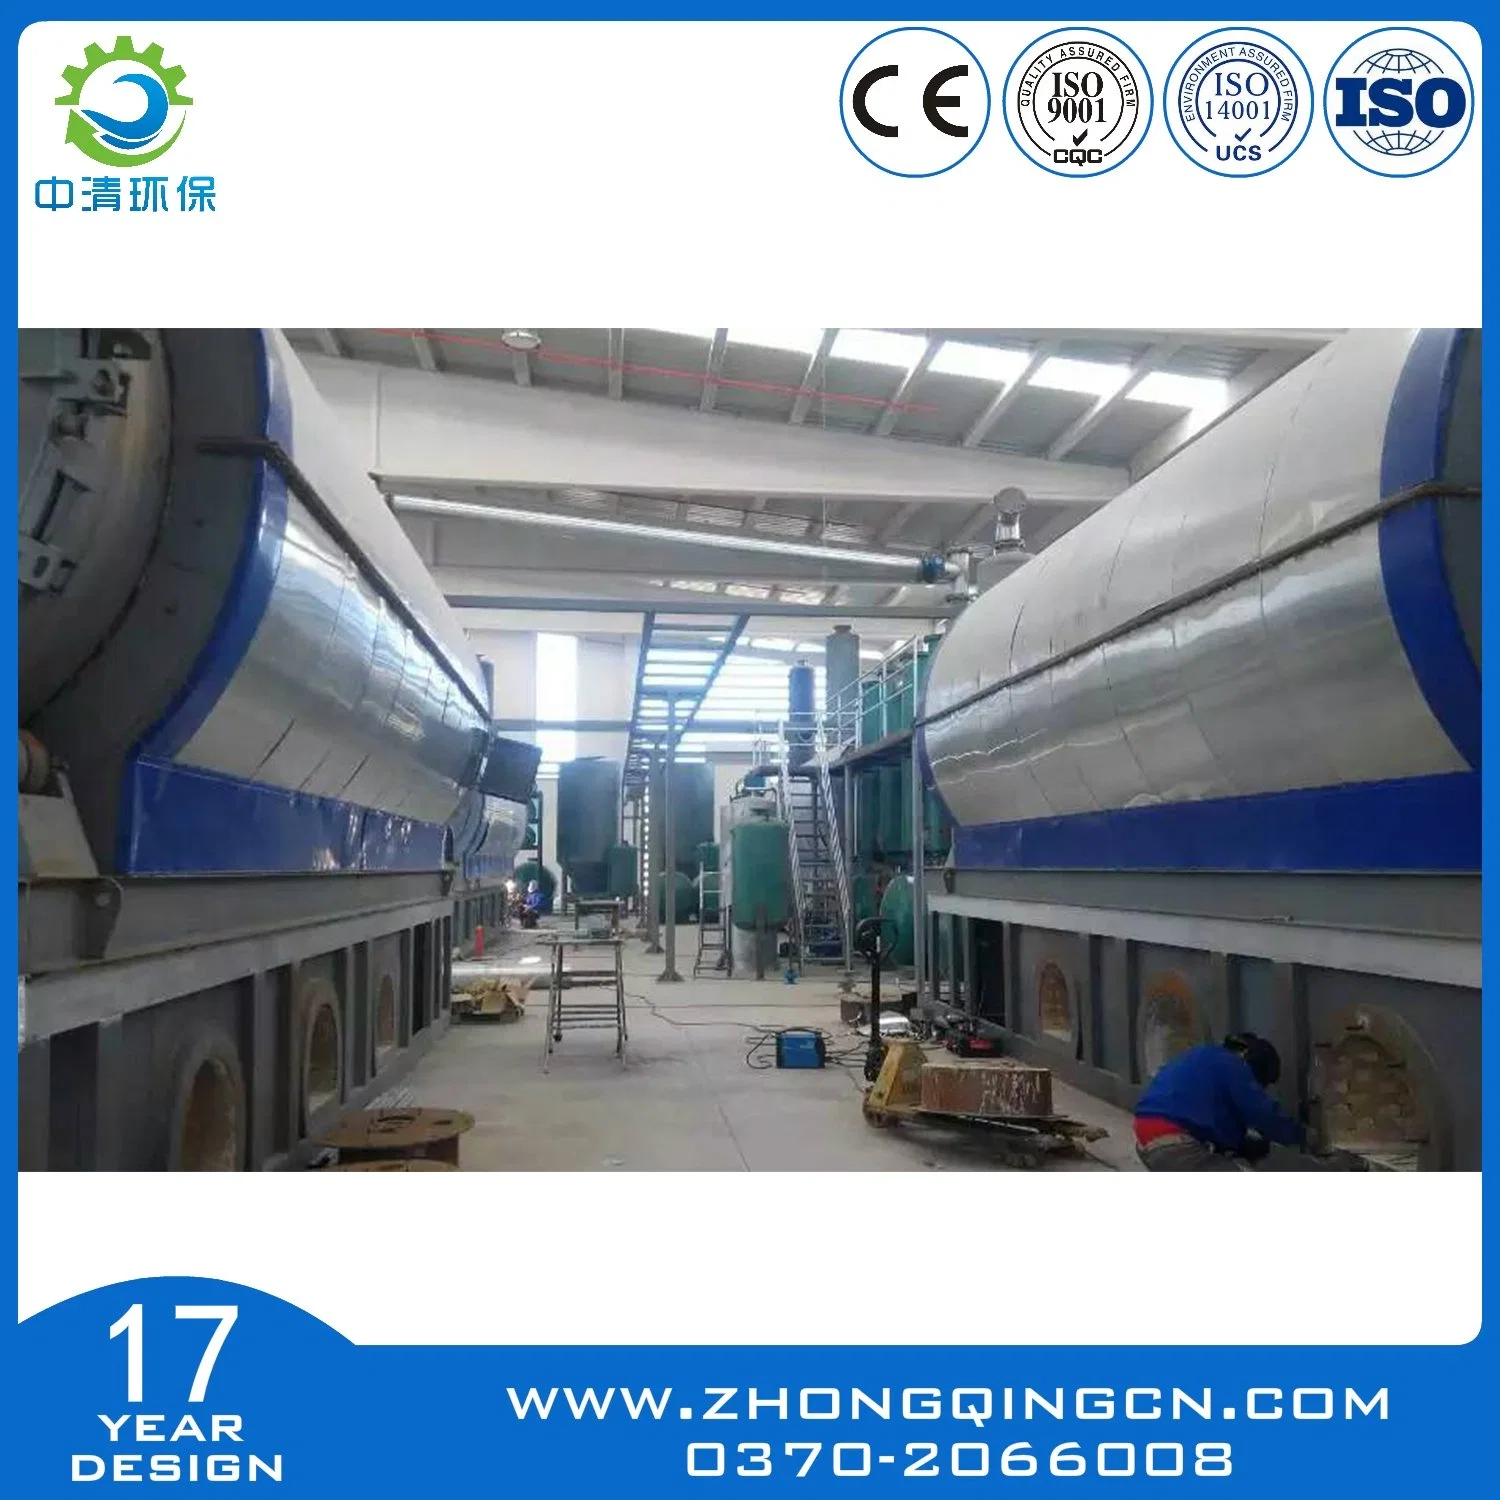 Solid Waste/Urban Waste/Waste Garbage Waste Treatment Equipment to Energy with CE, SGS, ISO, BV